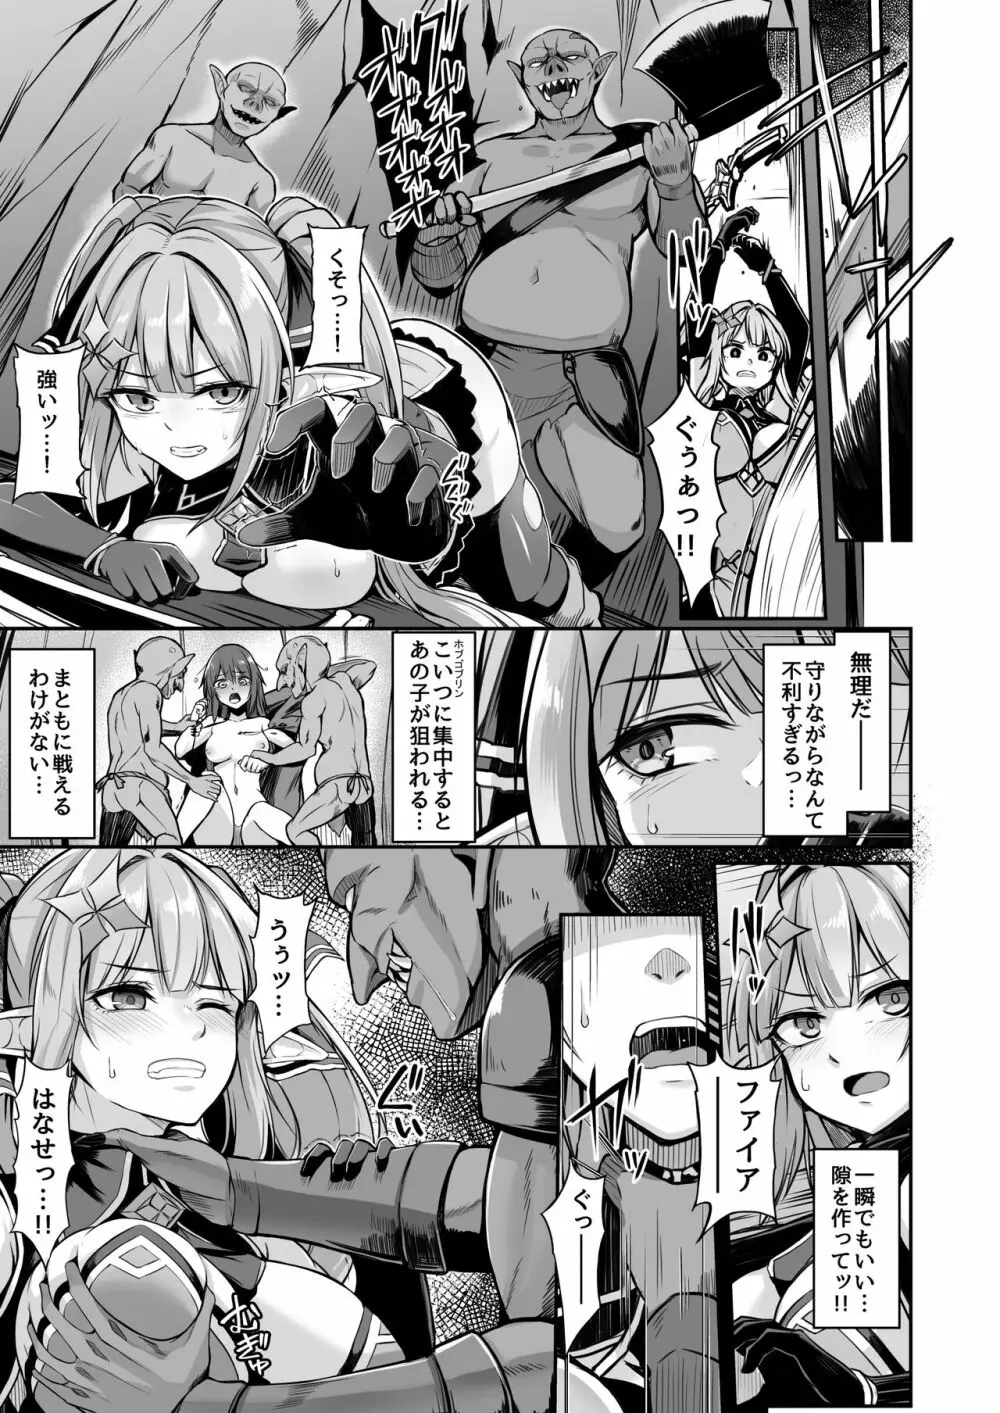 ELFIN QUEST #ゴブリン敗北編 Page.8